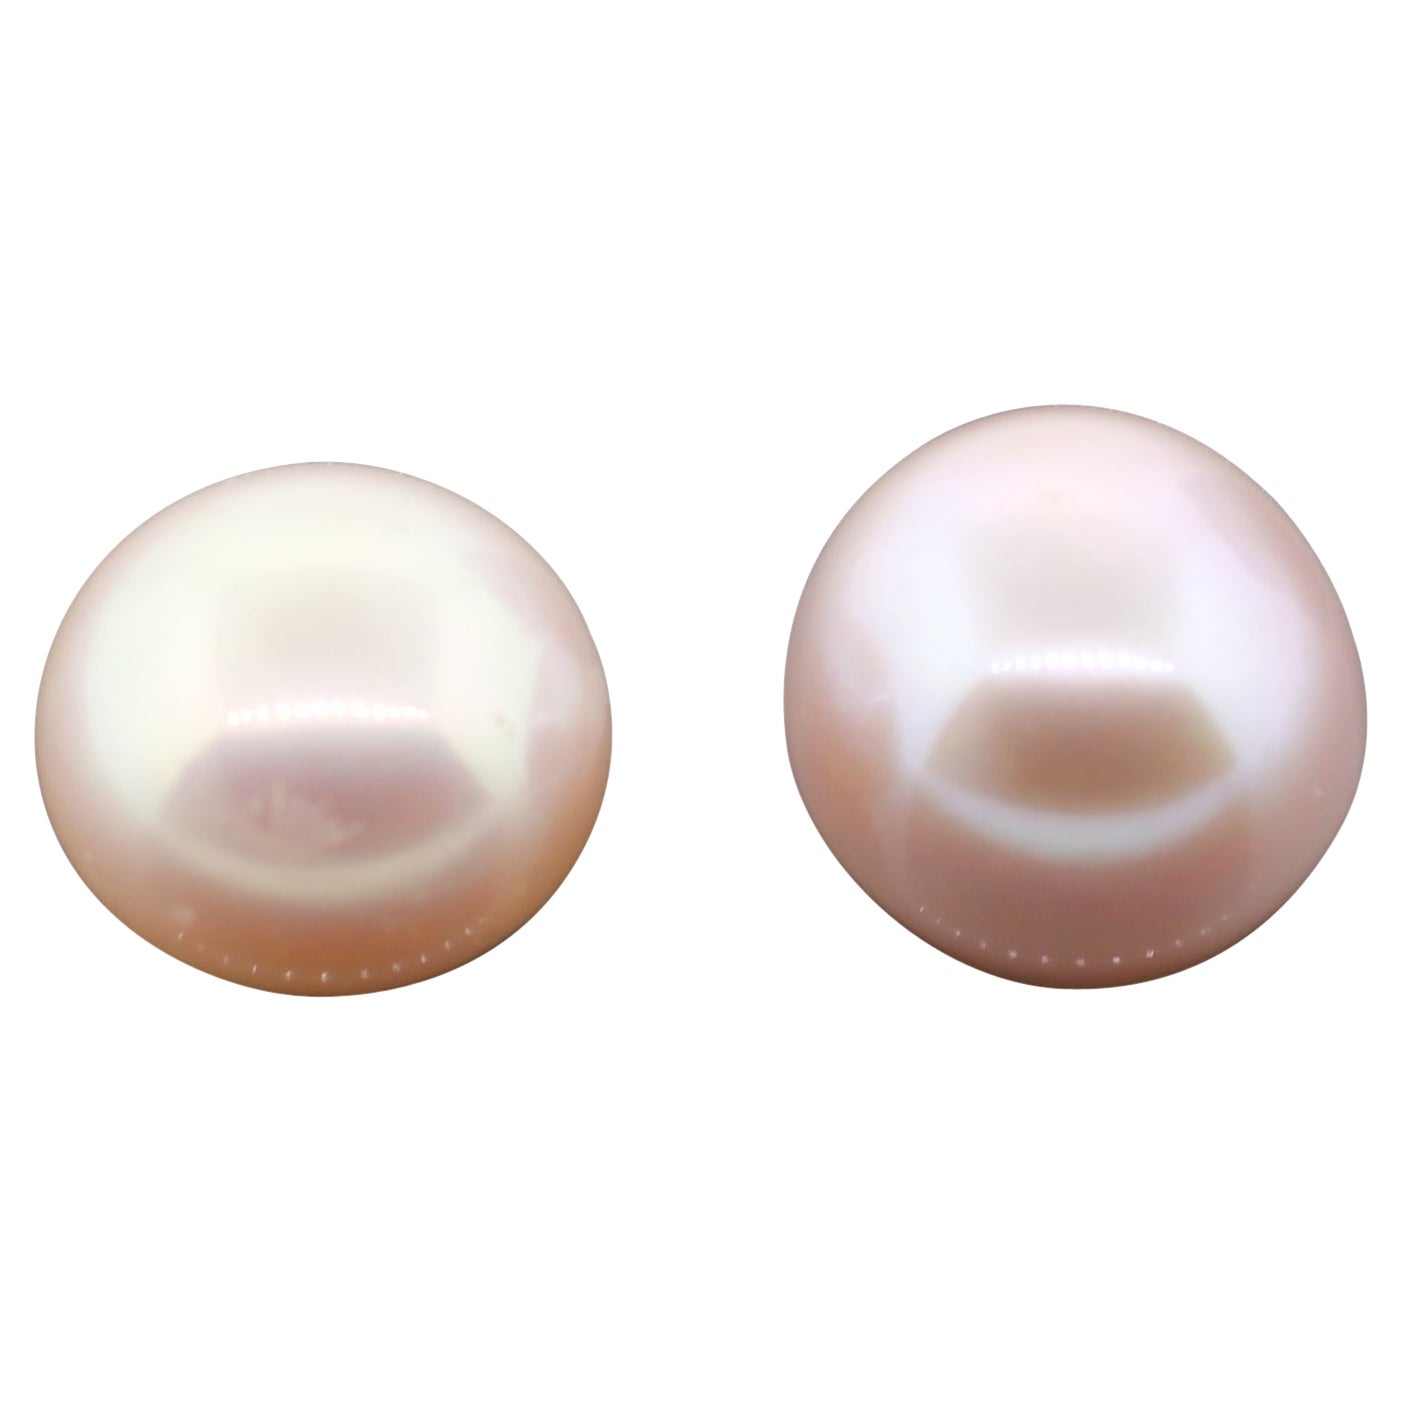 Hakimoto Pair of 14 mm Pink Botton Shape Cultured Pearls For Sale